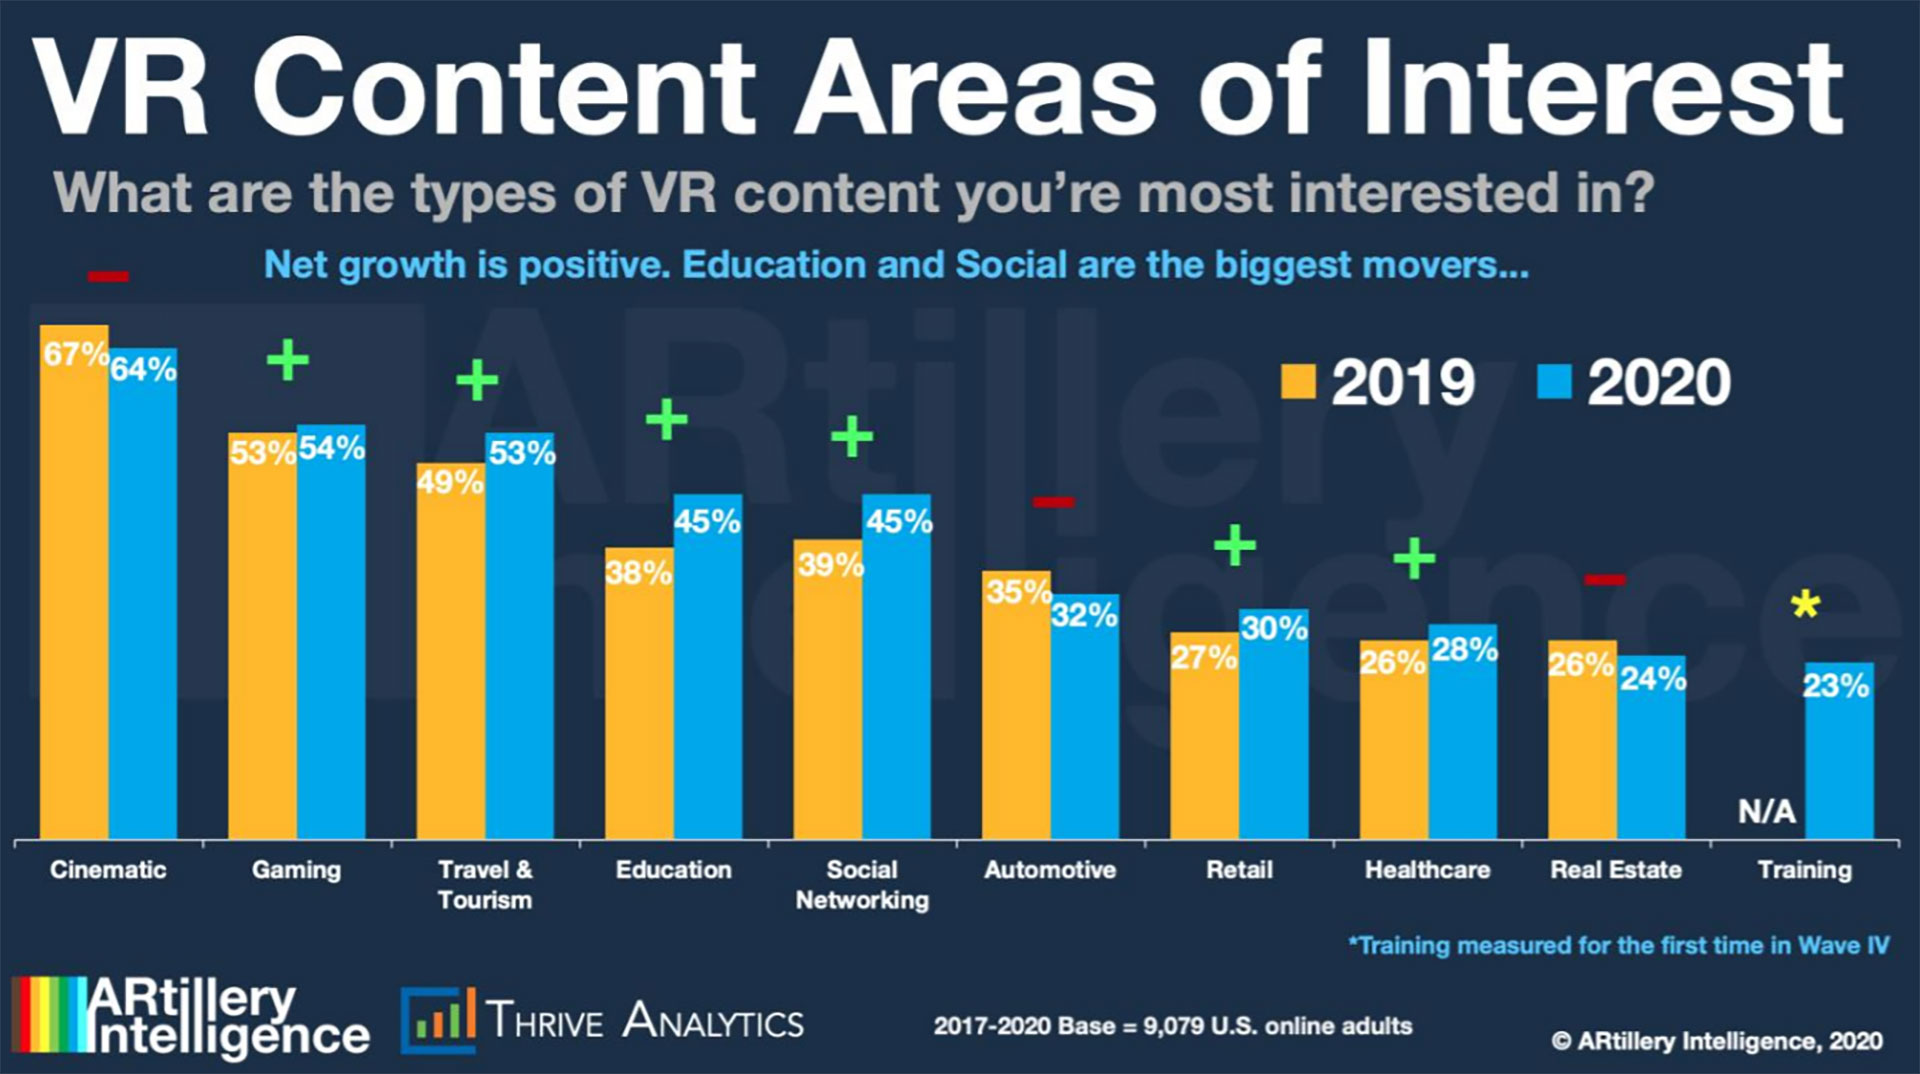 VR content areas of interest